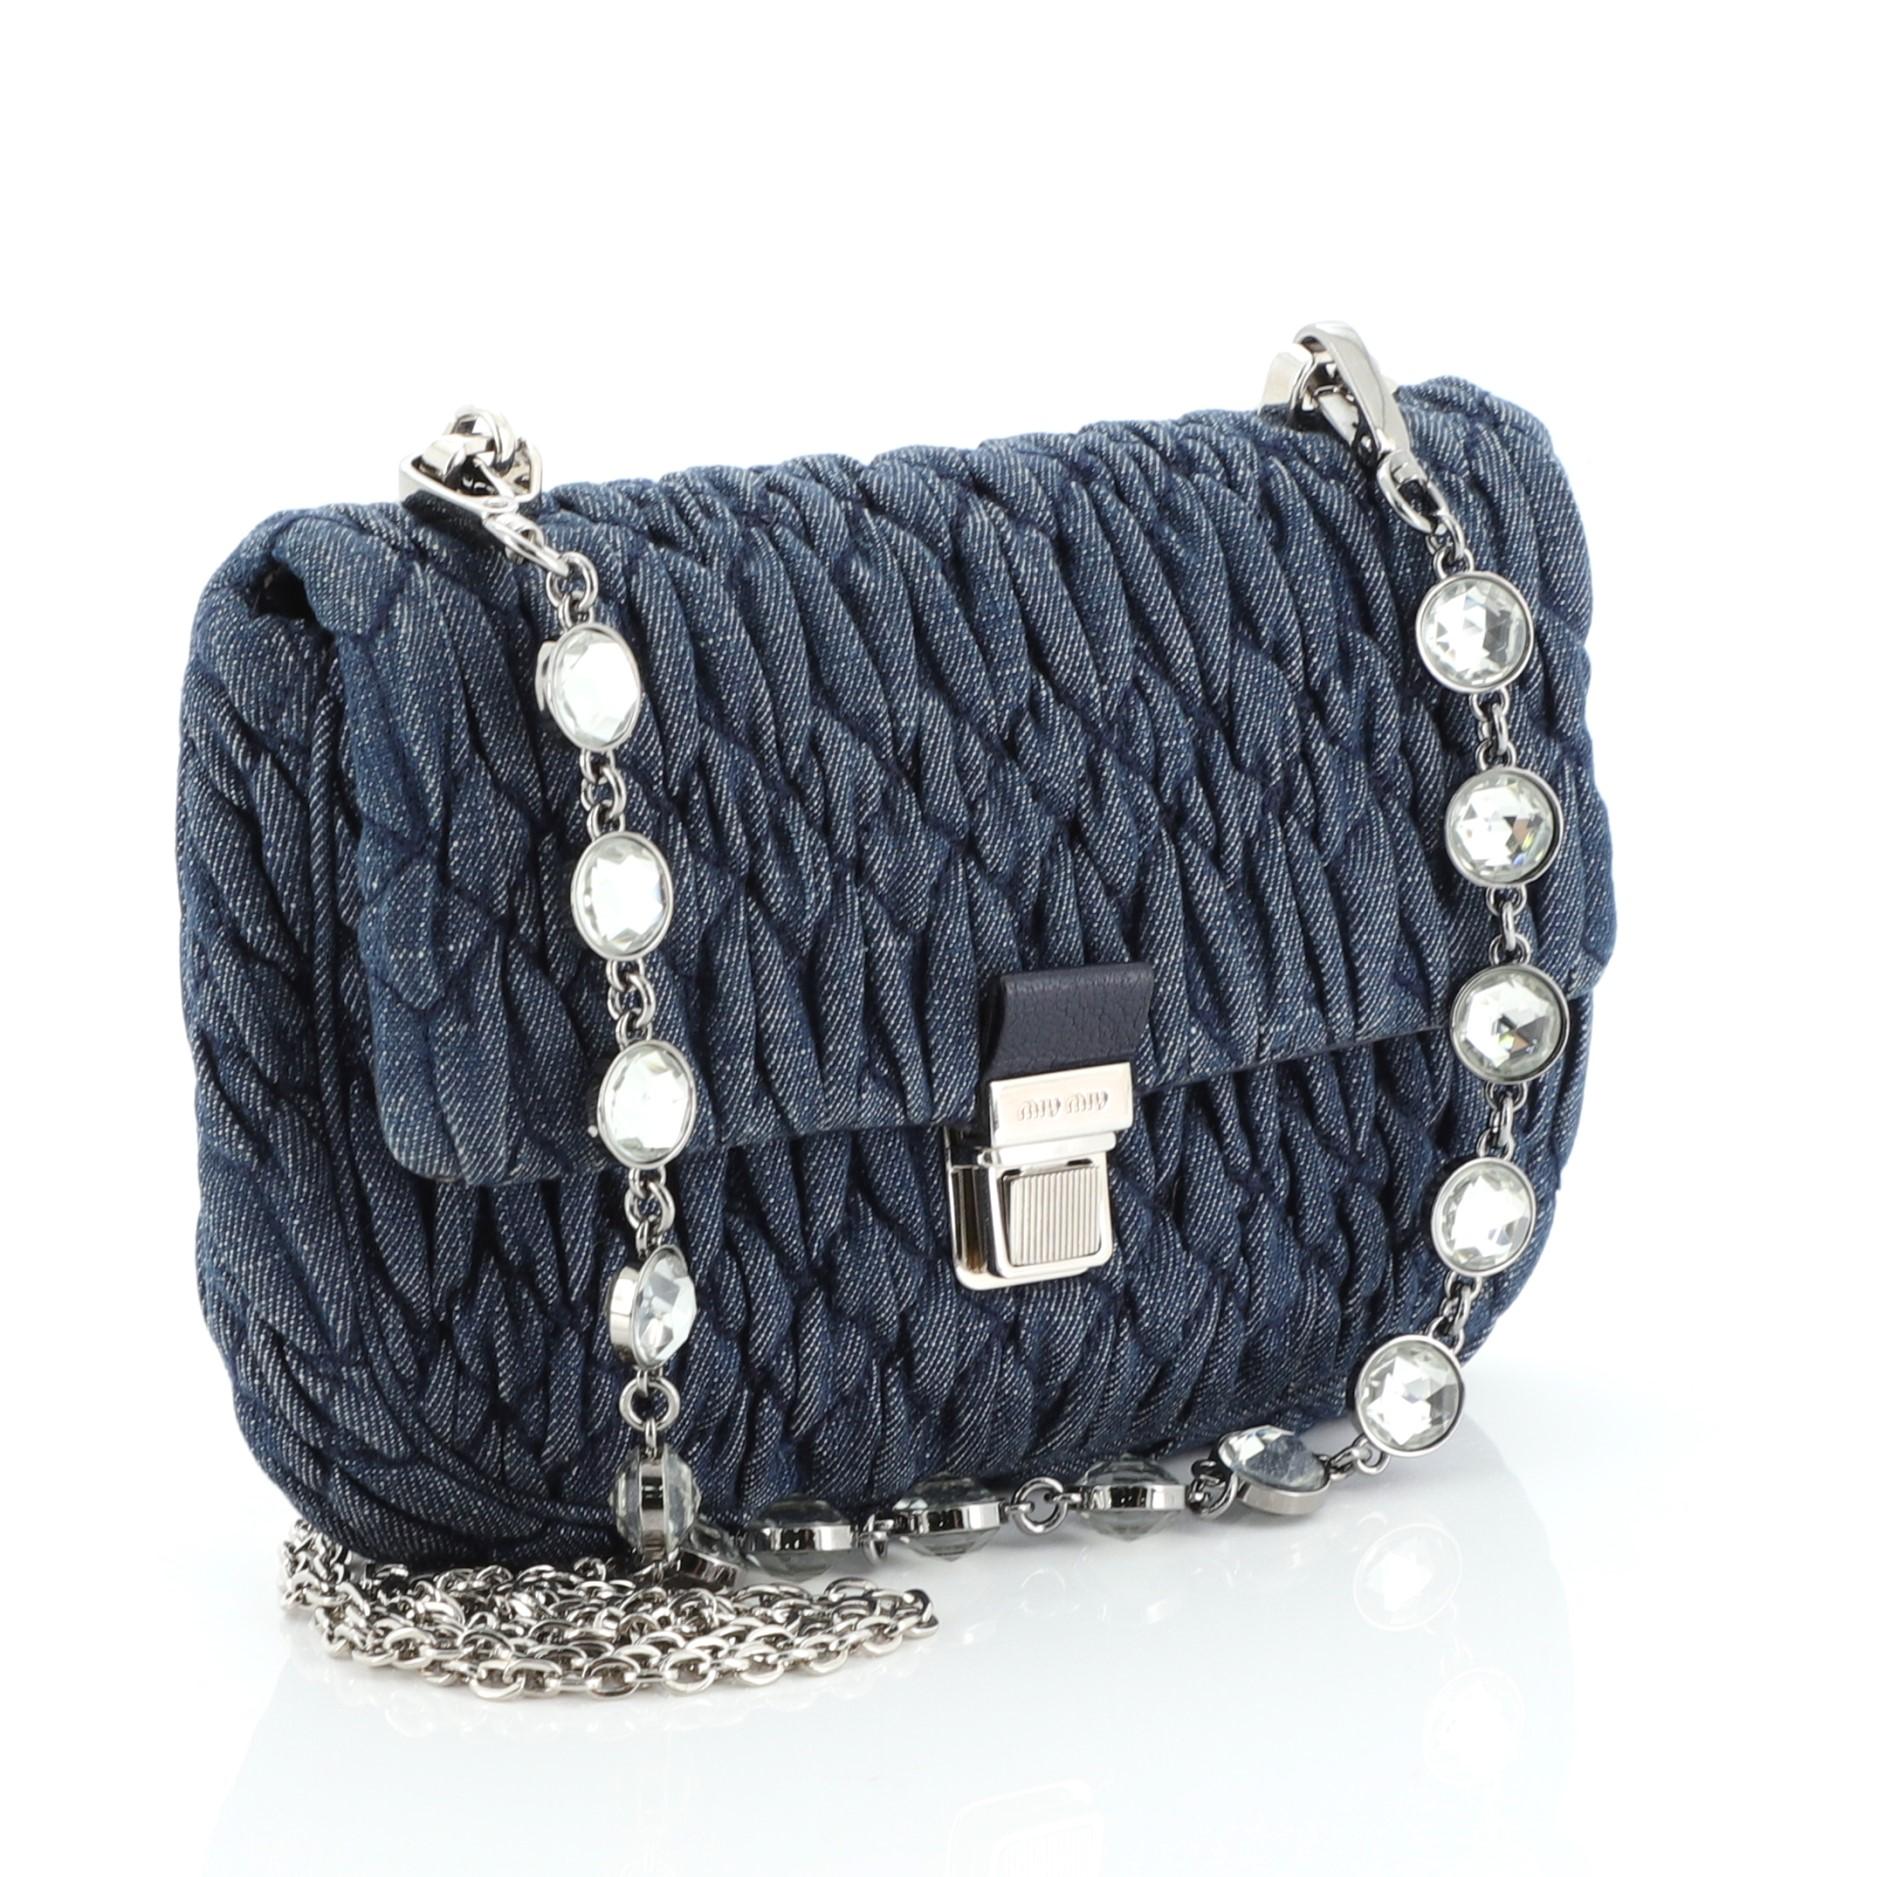 This Miu Miu Crystal Shoulder Bag Matelasse Denim Medium, crafted in blue matelasse denim, features a chain and crystal strap, frontal flap and silver-tone hardware. Its push-lock closure opens to a blue leather and fabric interior with side slip